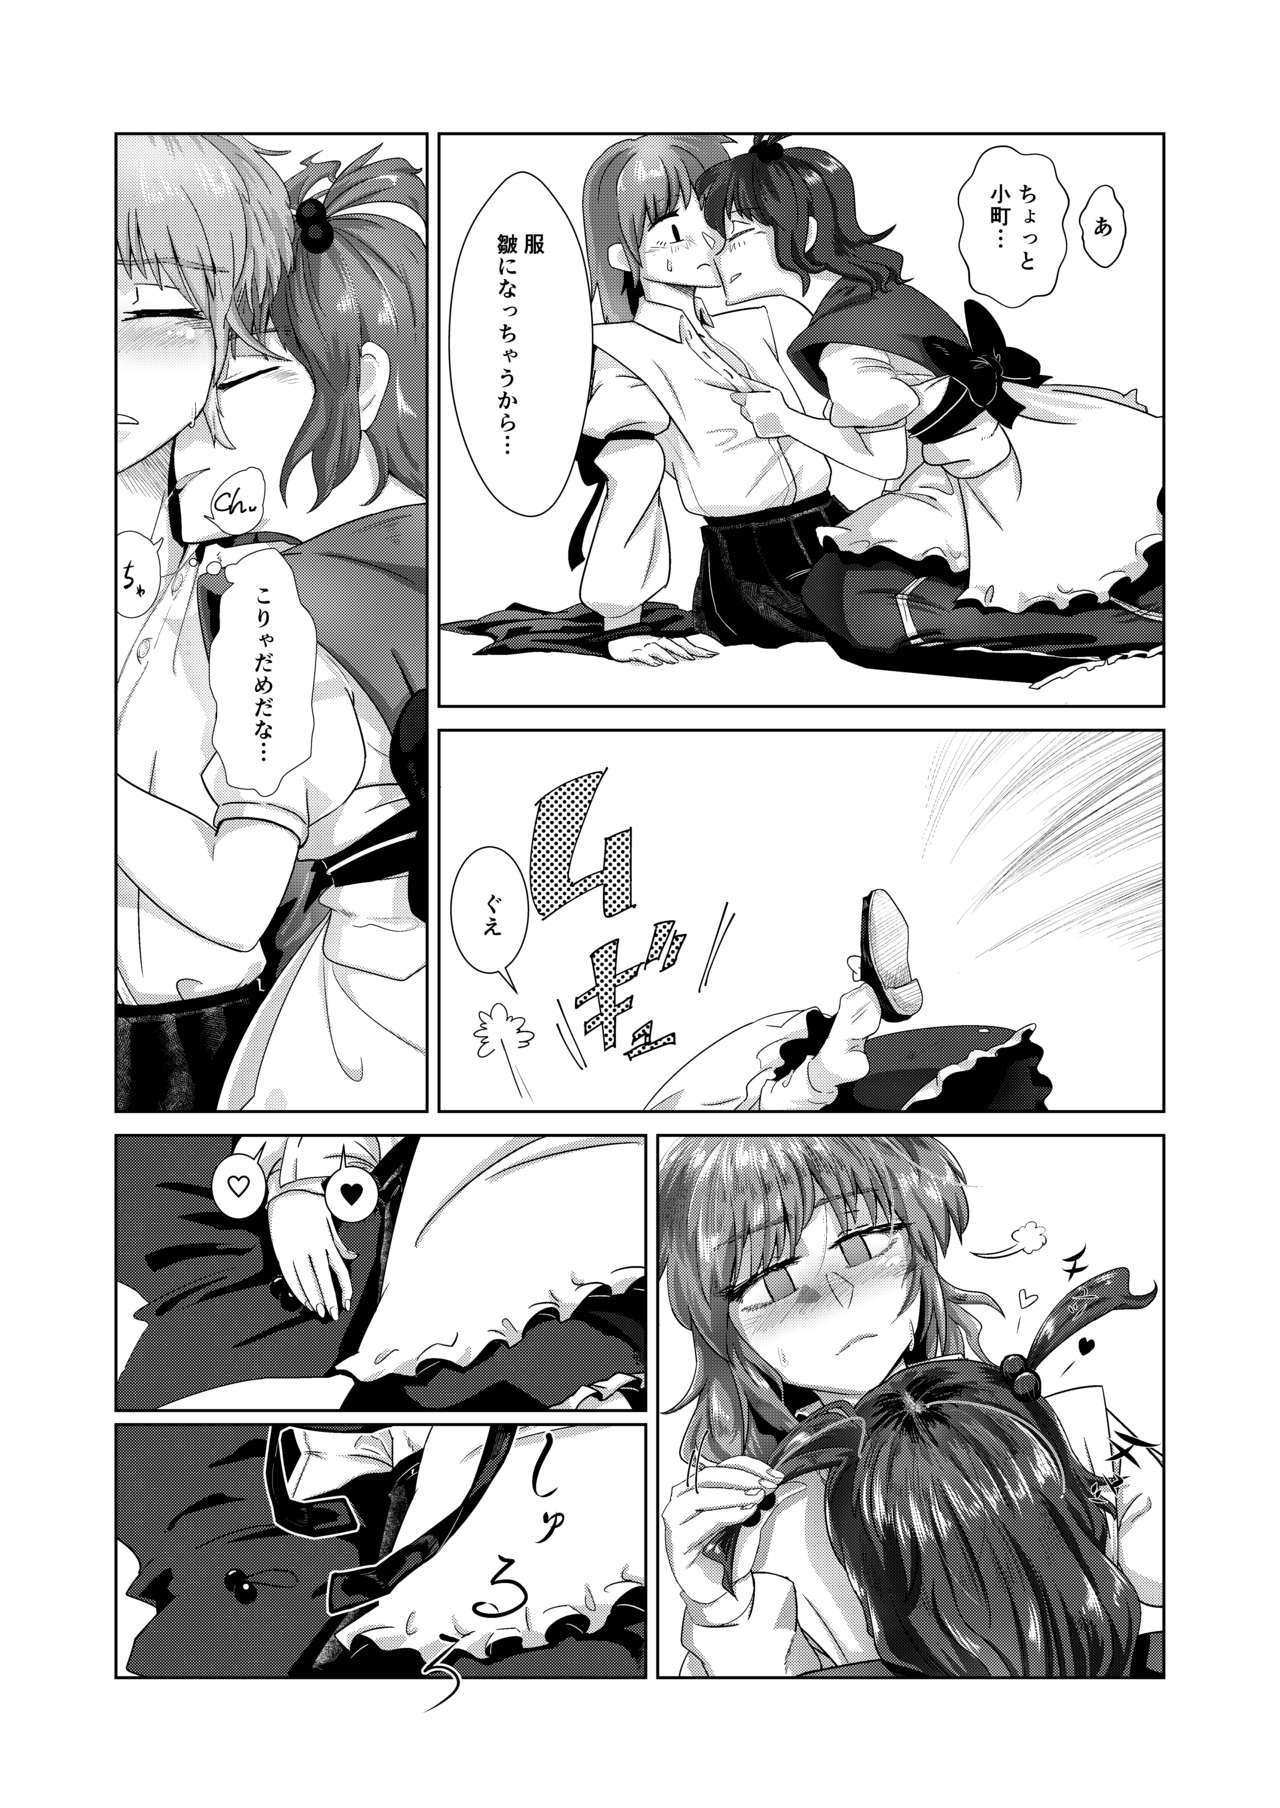 Massages 愛の輪郭 - Touhou project Hottie - Page 10